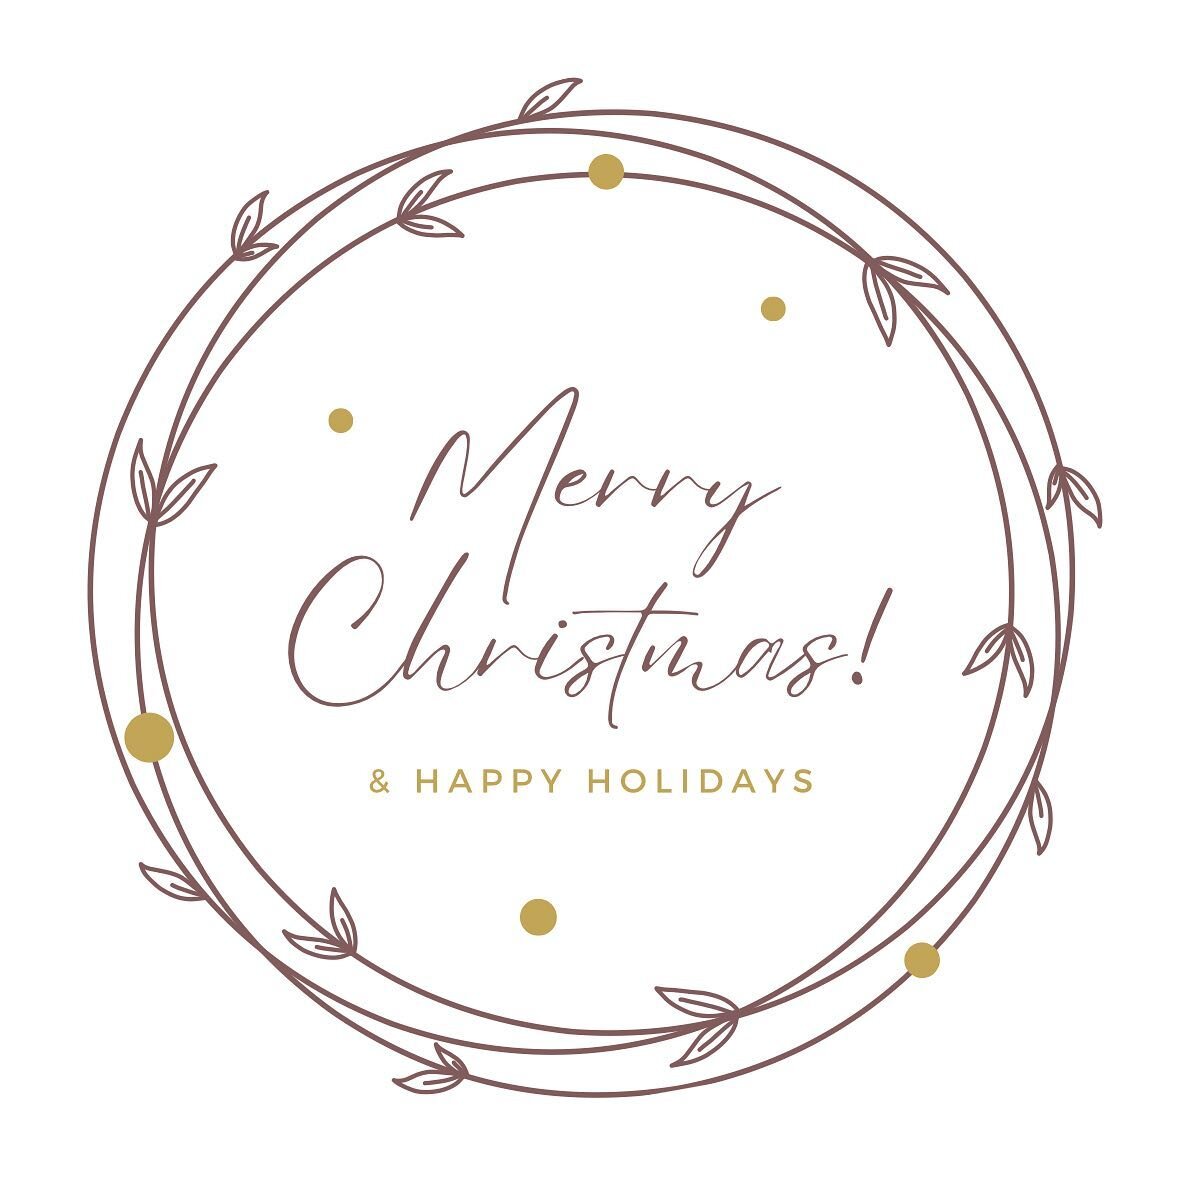 Merry Christmas friends! May you all have a wonderful time with your family and friends. 

Looking forward to what 2023 has in store for me and Manea Interiors